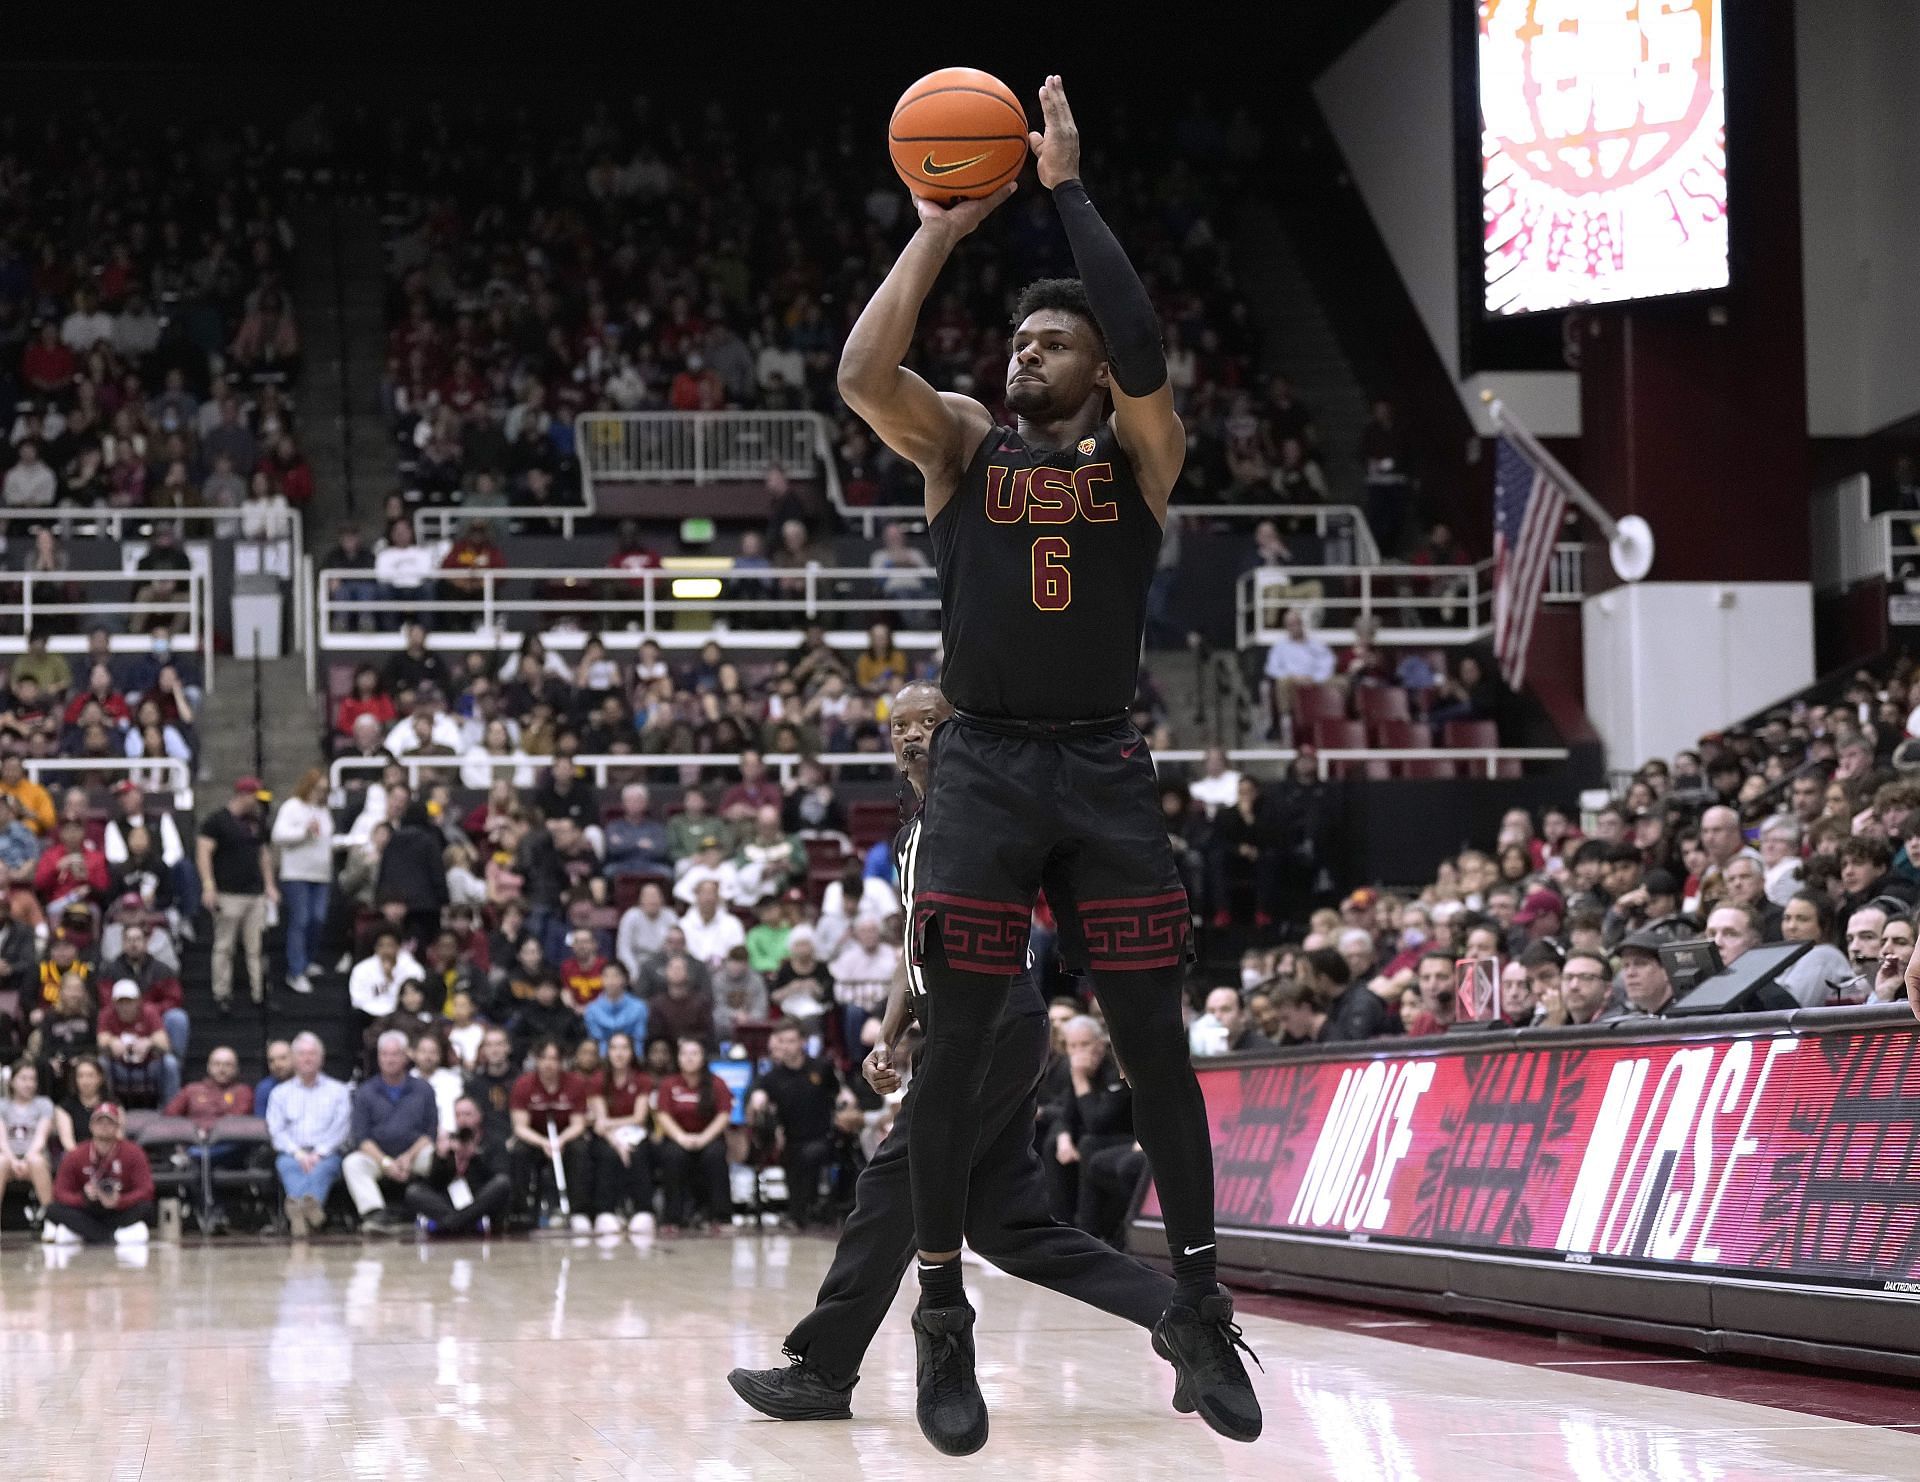 Bronny shoots a 3-pointer against the Stanford Cardinal